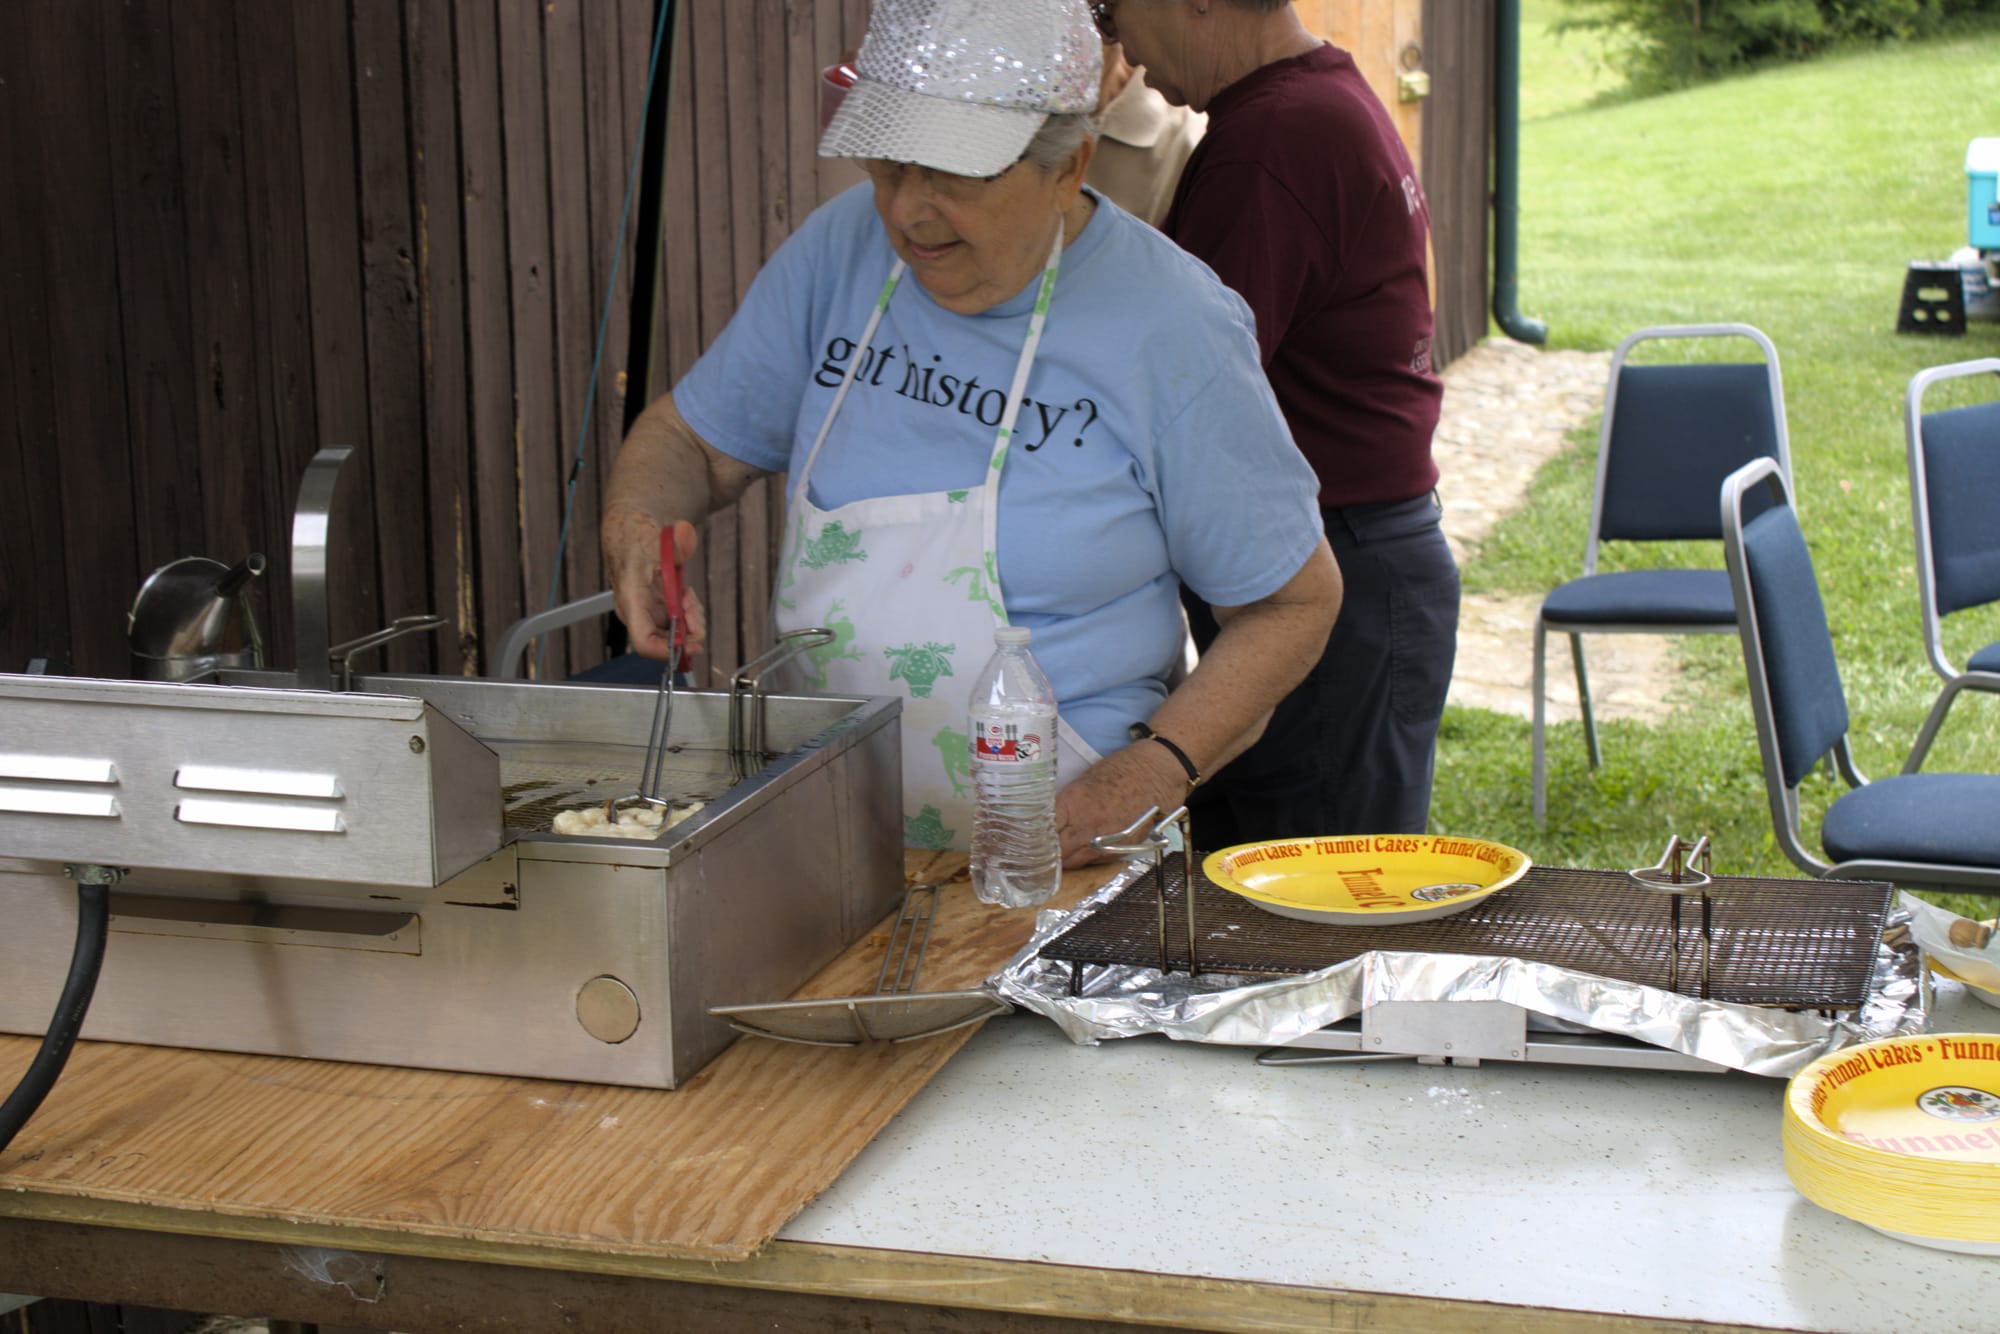 Woman in blue fries funnel cakes using a fryer on a wooden table.